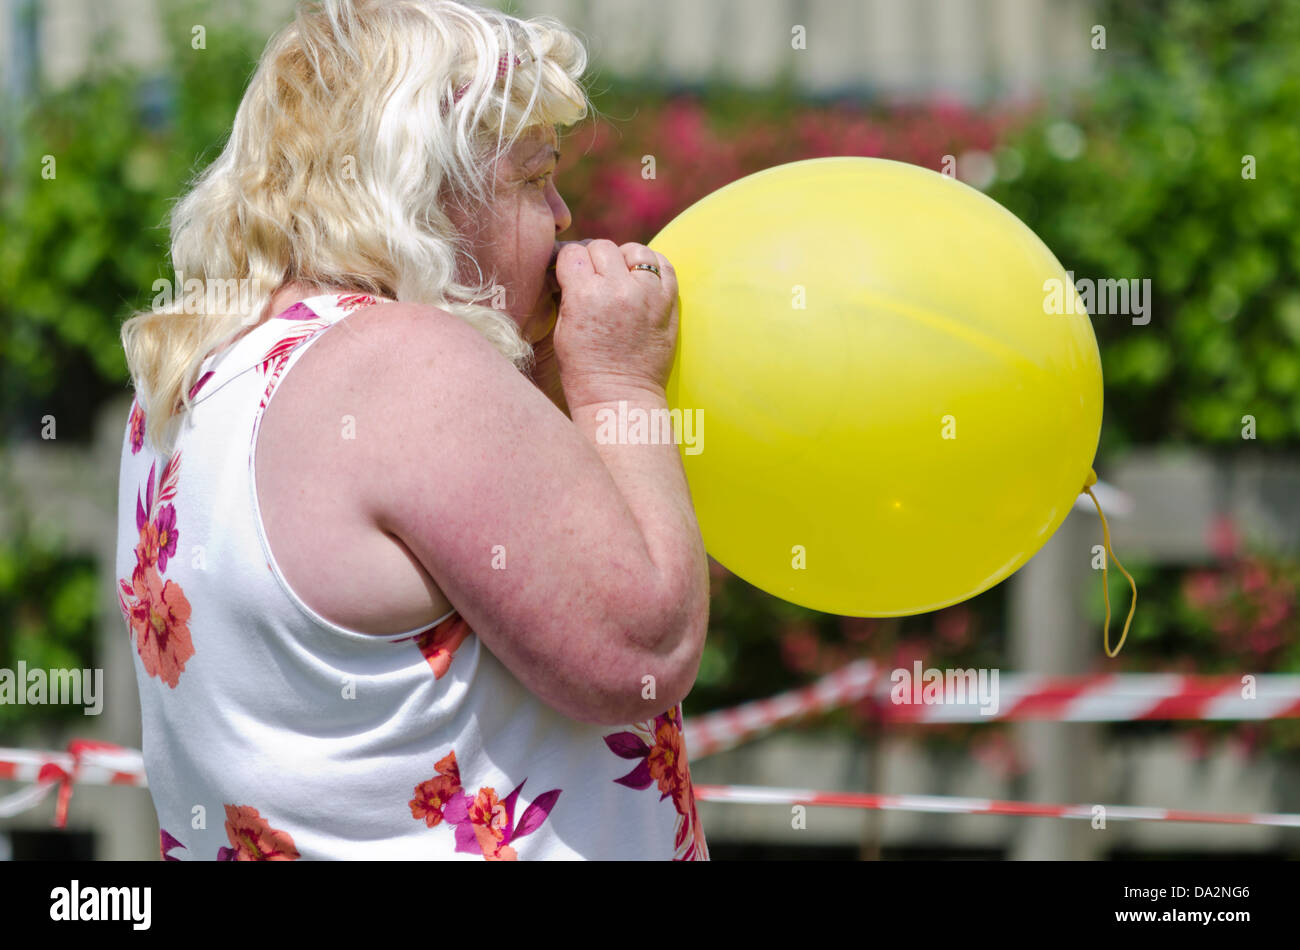 Woman blowing up a yellow balloon Stock Photo